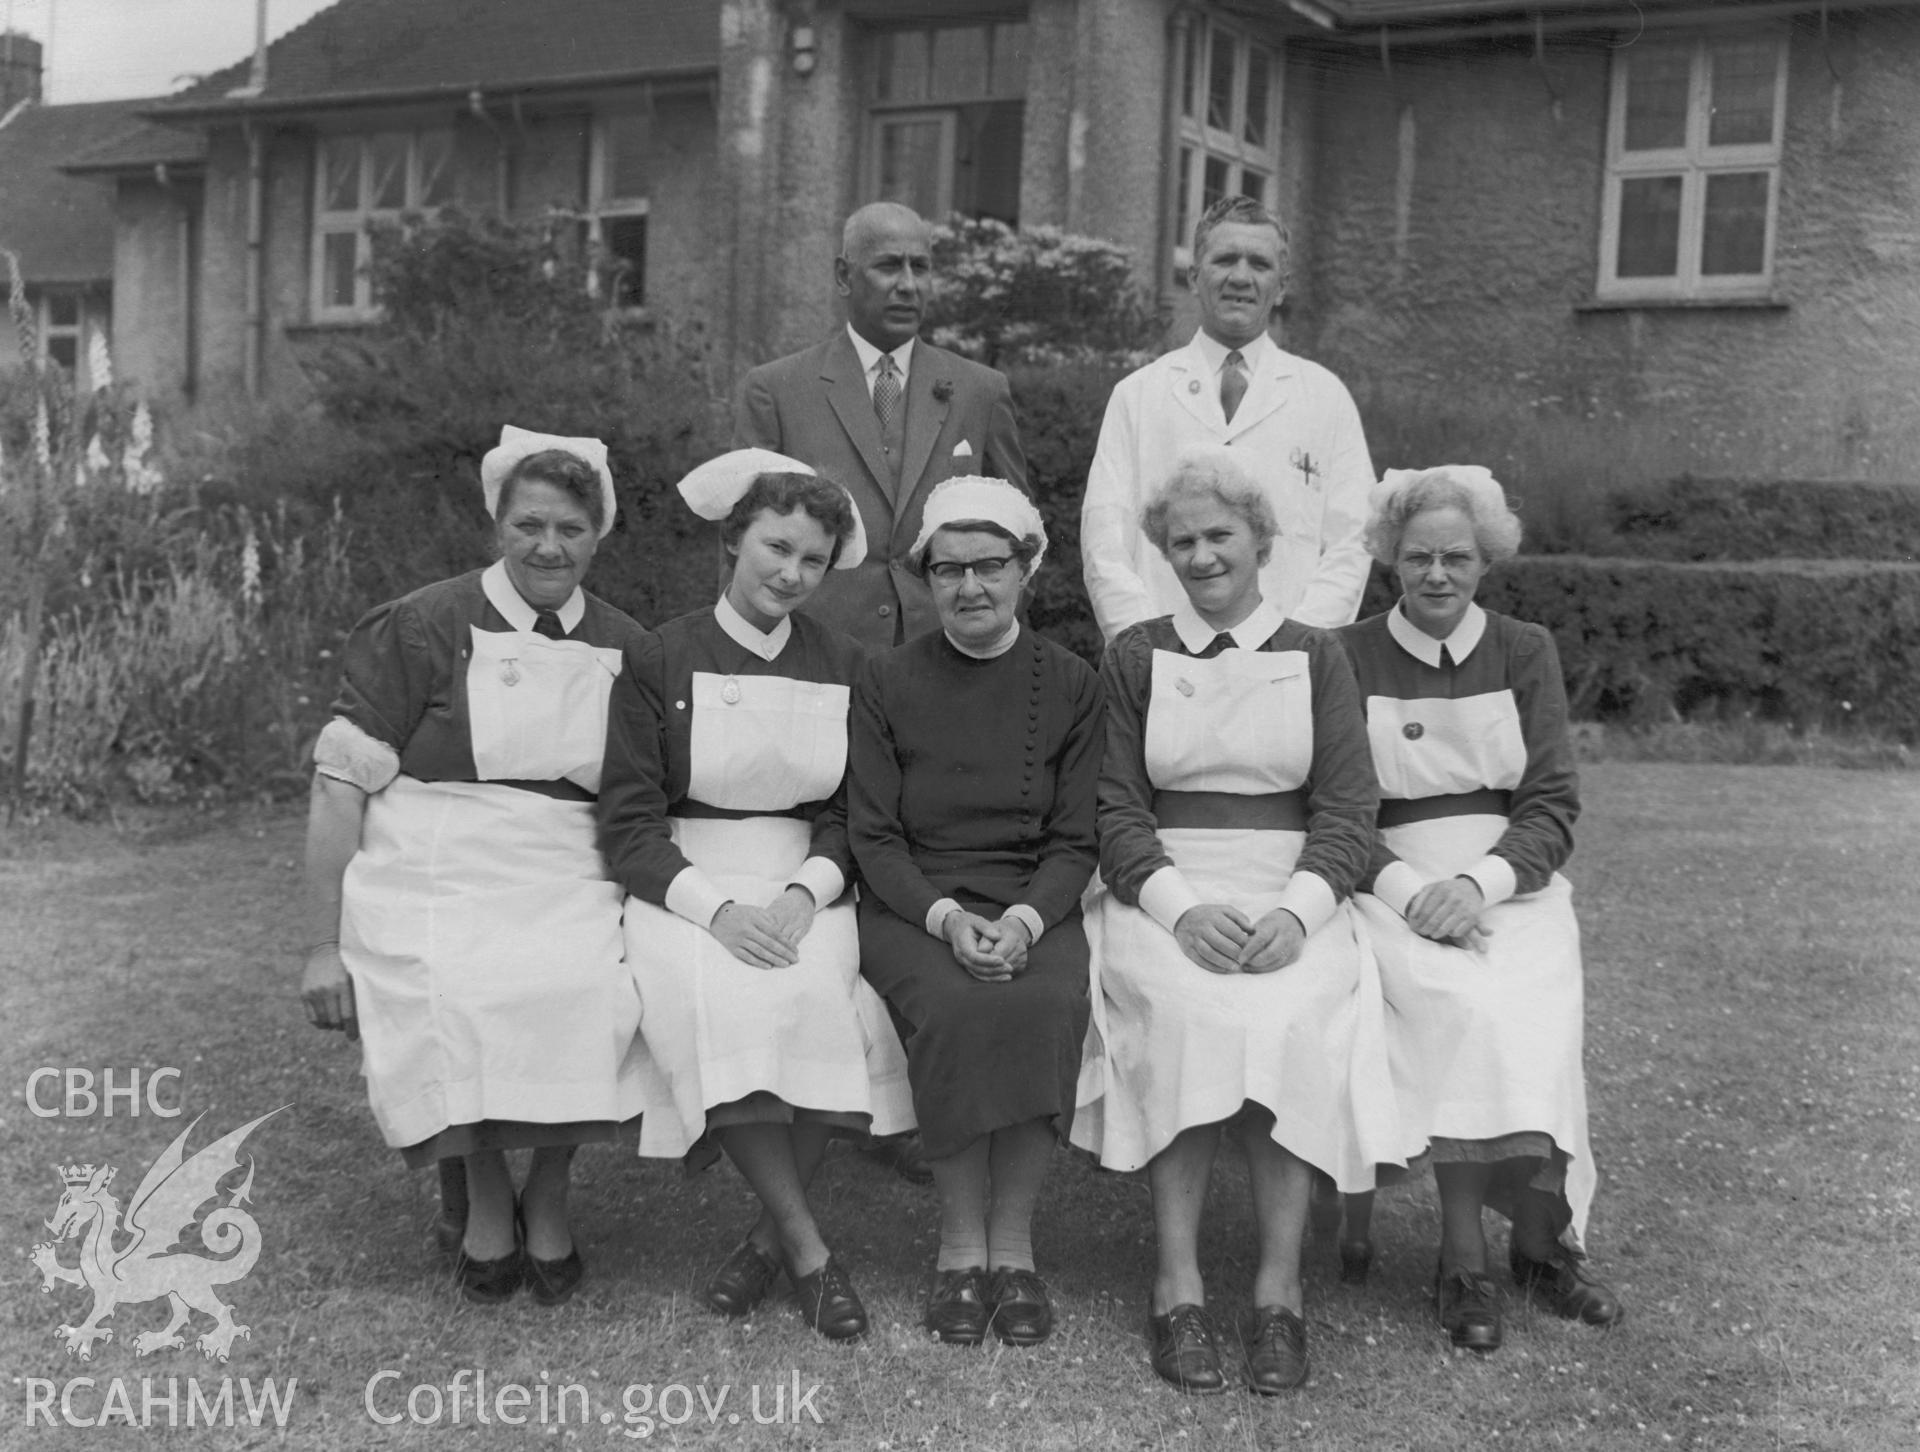 Black and white photograph showing medical staff outside Abertillery Hospital. Staff are identified as Dr R.W. Scanlon, Mr Aubrey (charge nurse), Sister Morgan or Sister Stevens, Sister Prosser, Matron G.E. Body, Sister Lewis and Sister Poultney.